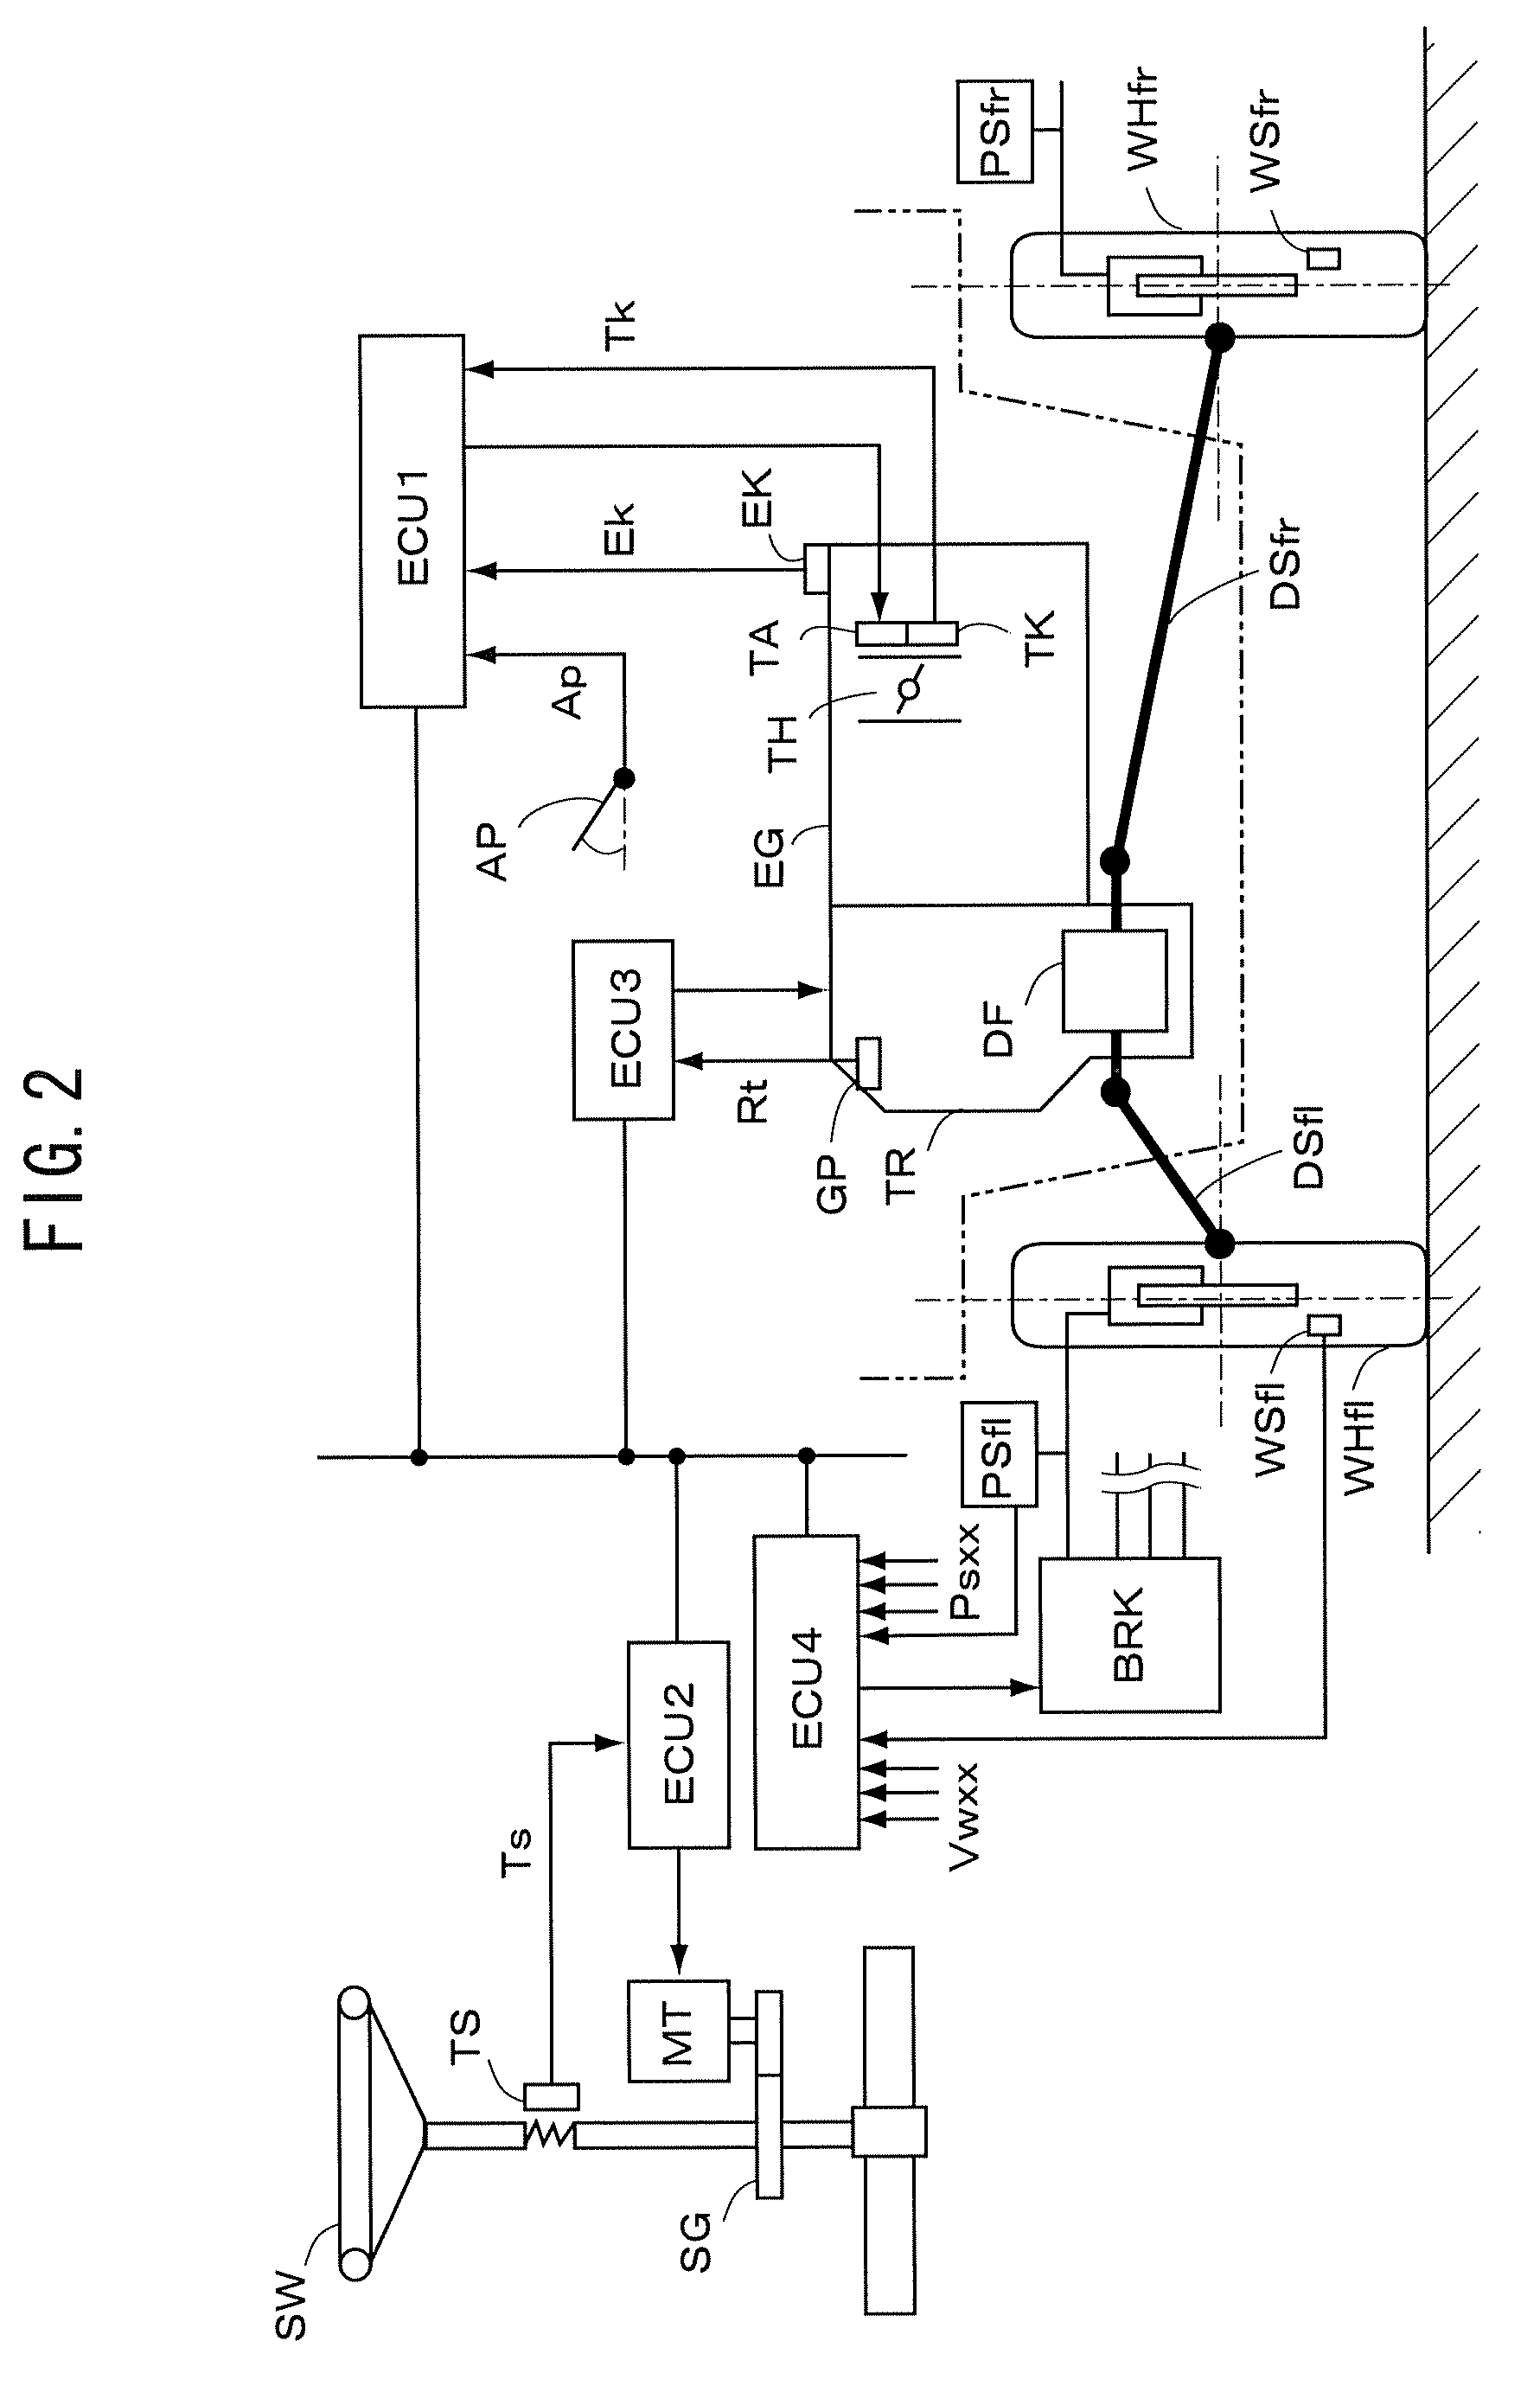 Steering control apparatus for a vehicle